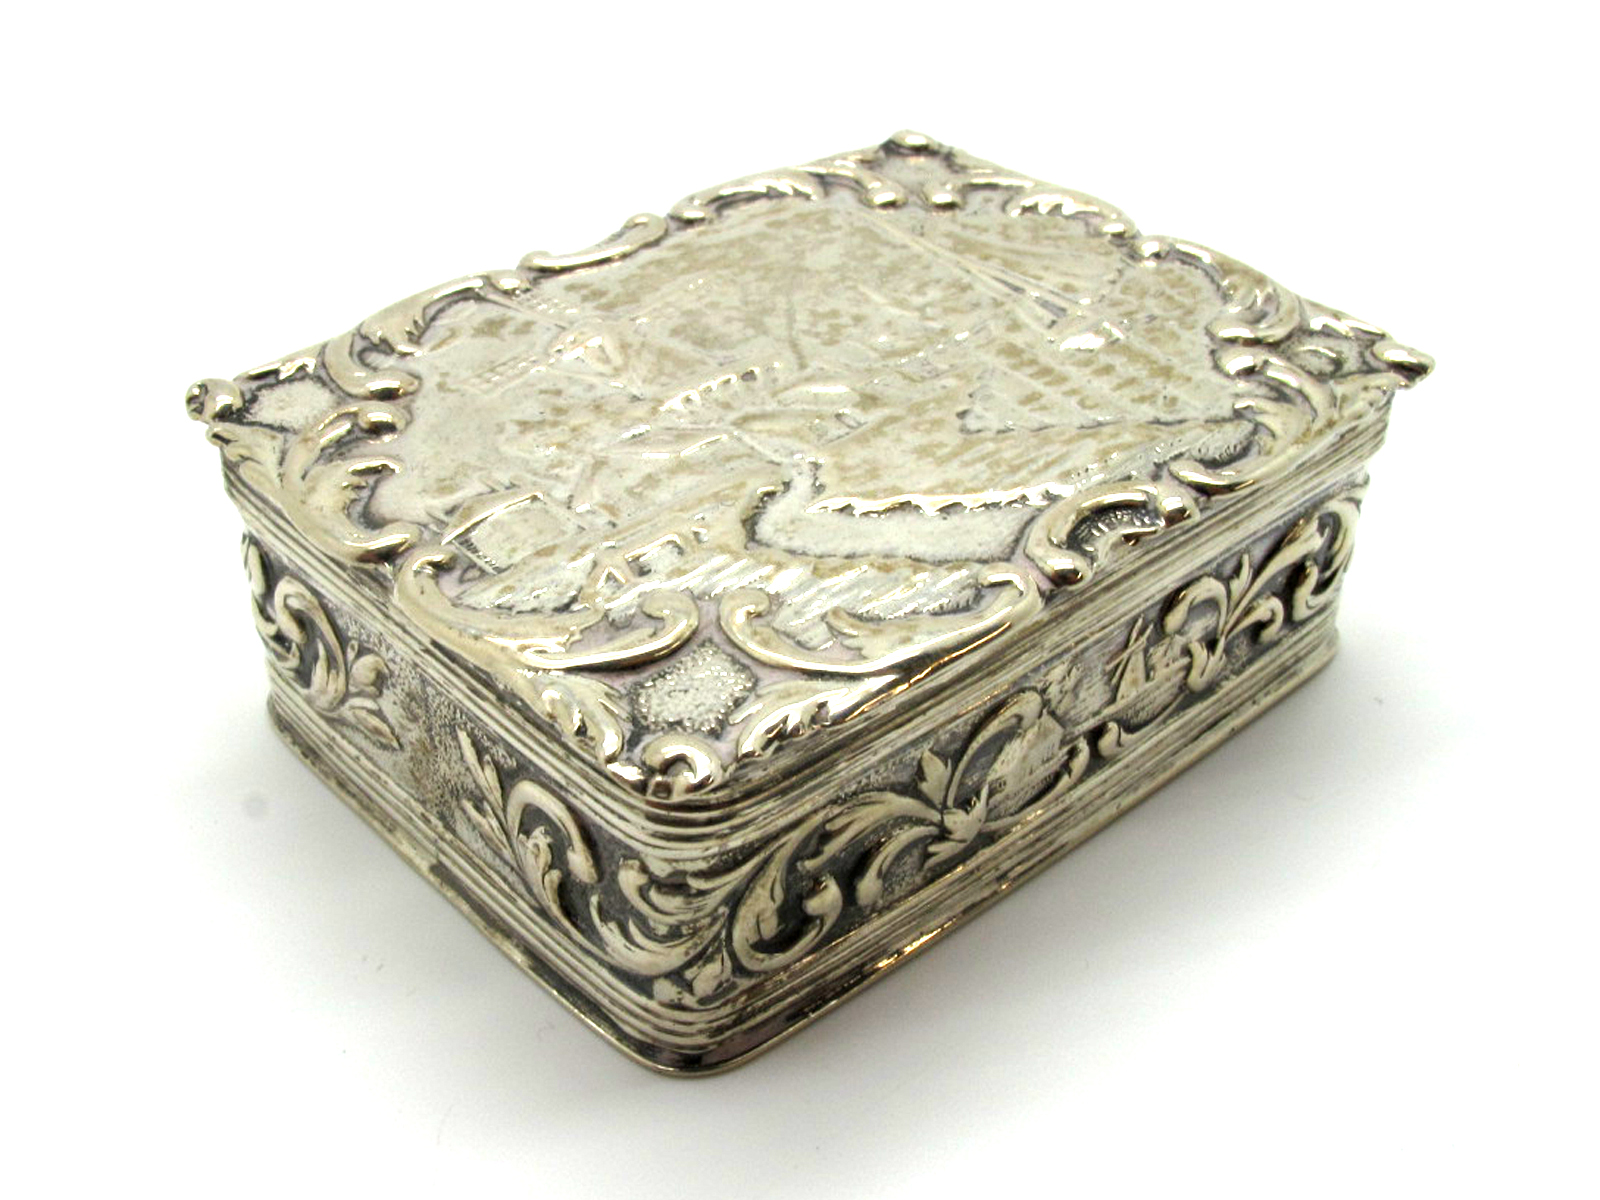 A Dutch Snuff Box, HH (possibly Hubertus Hooijkaas), of rectangular form, allover detailed in